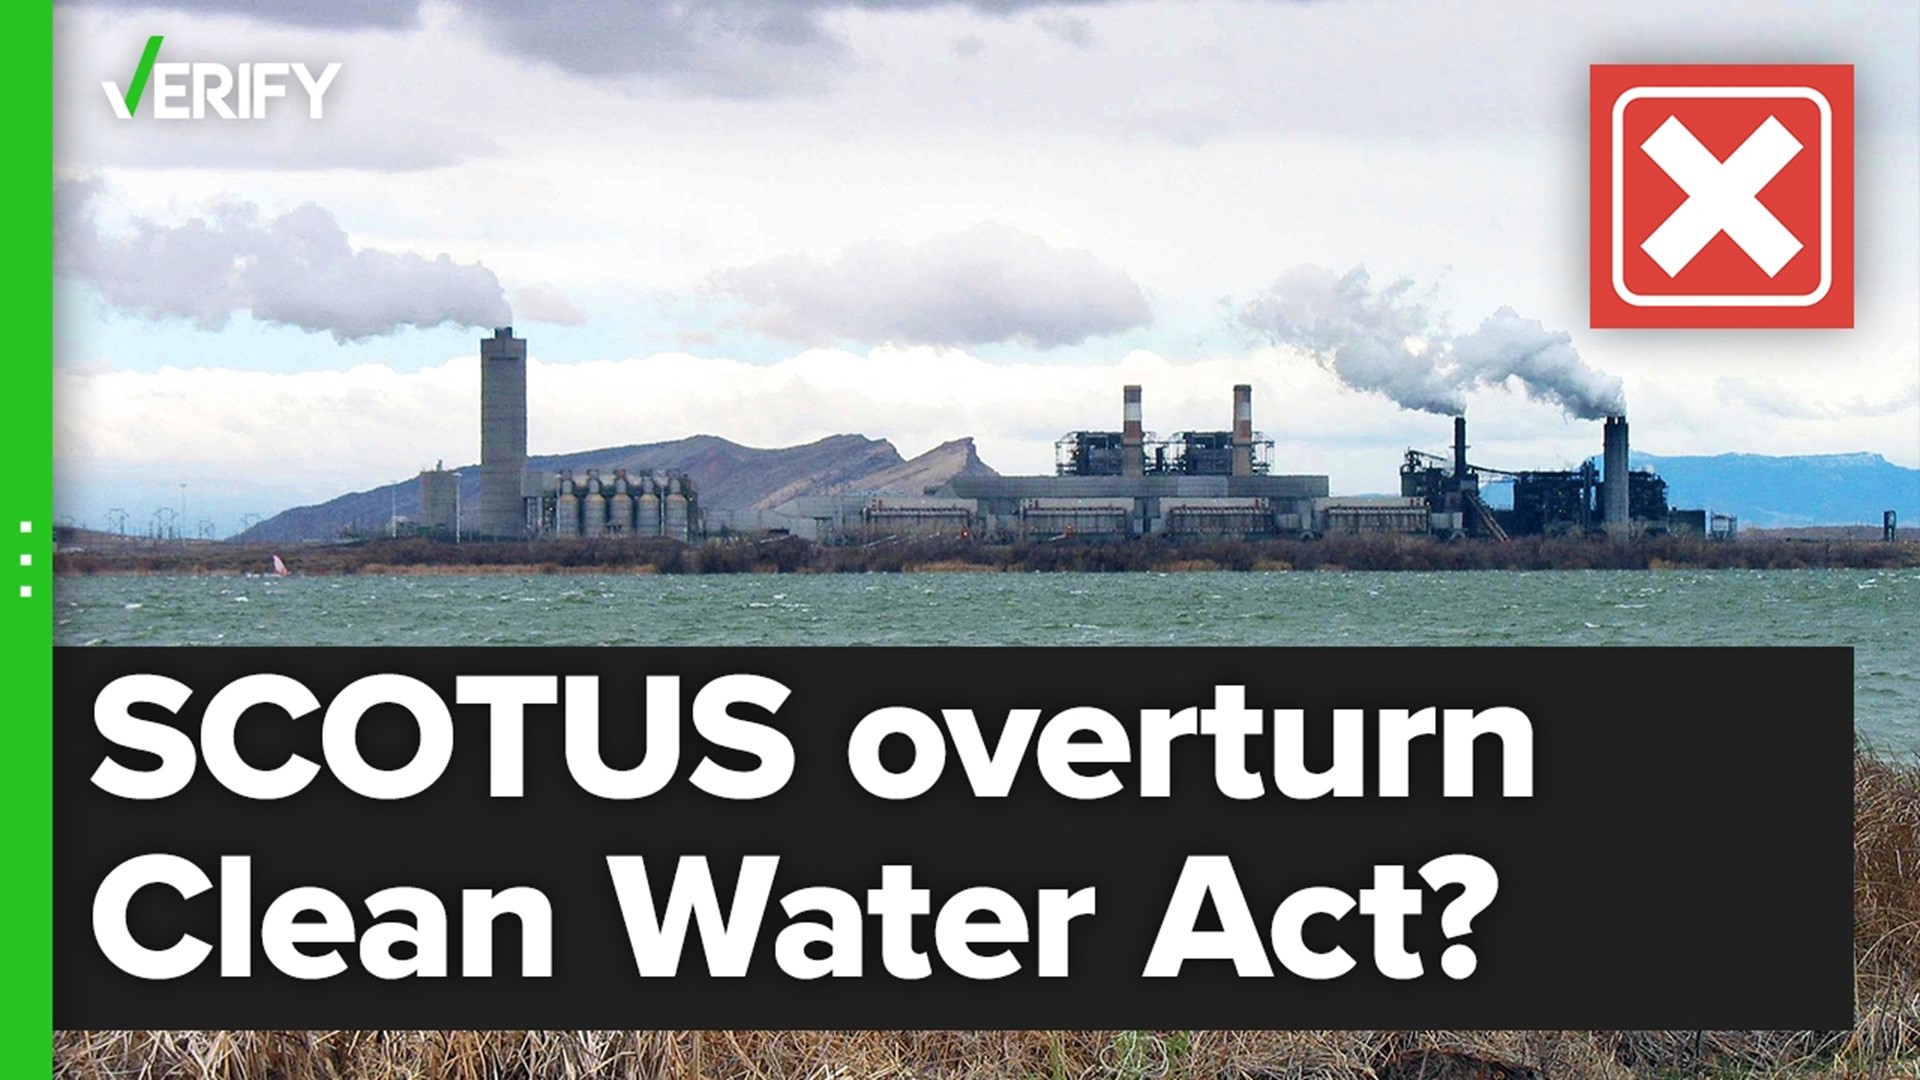 A viral TikTok claimed the Supreme Court overturned the Clean Water Act. That’s false.